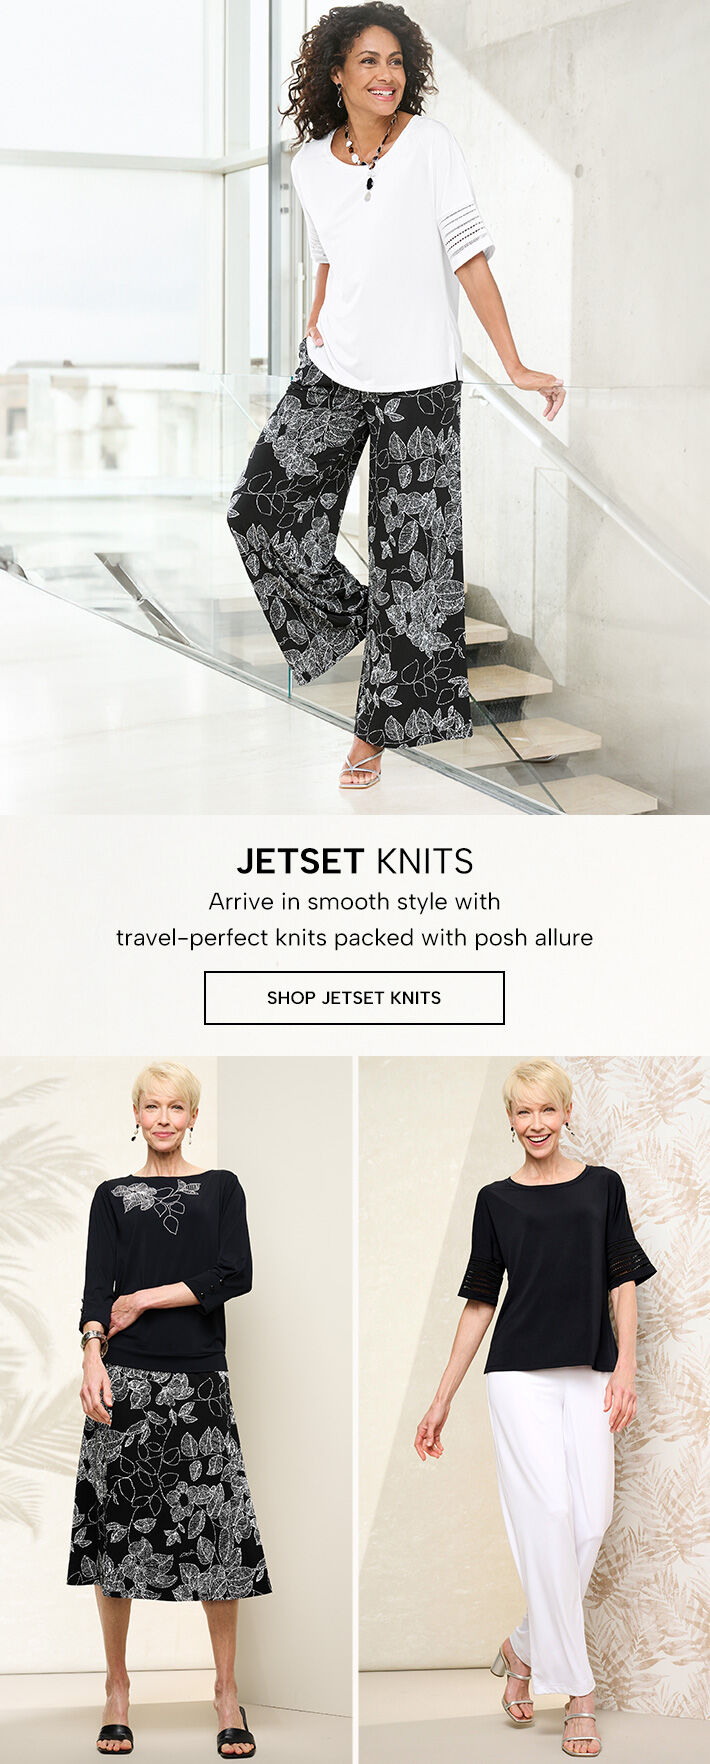 Jetset Knits - arrive in smooth style with travel-perfect knits packed with posh allure. Shop Jetset Knits